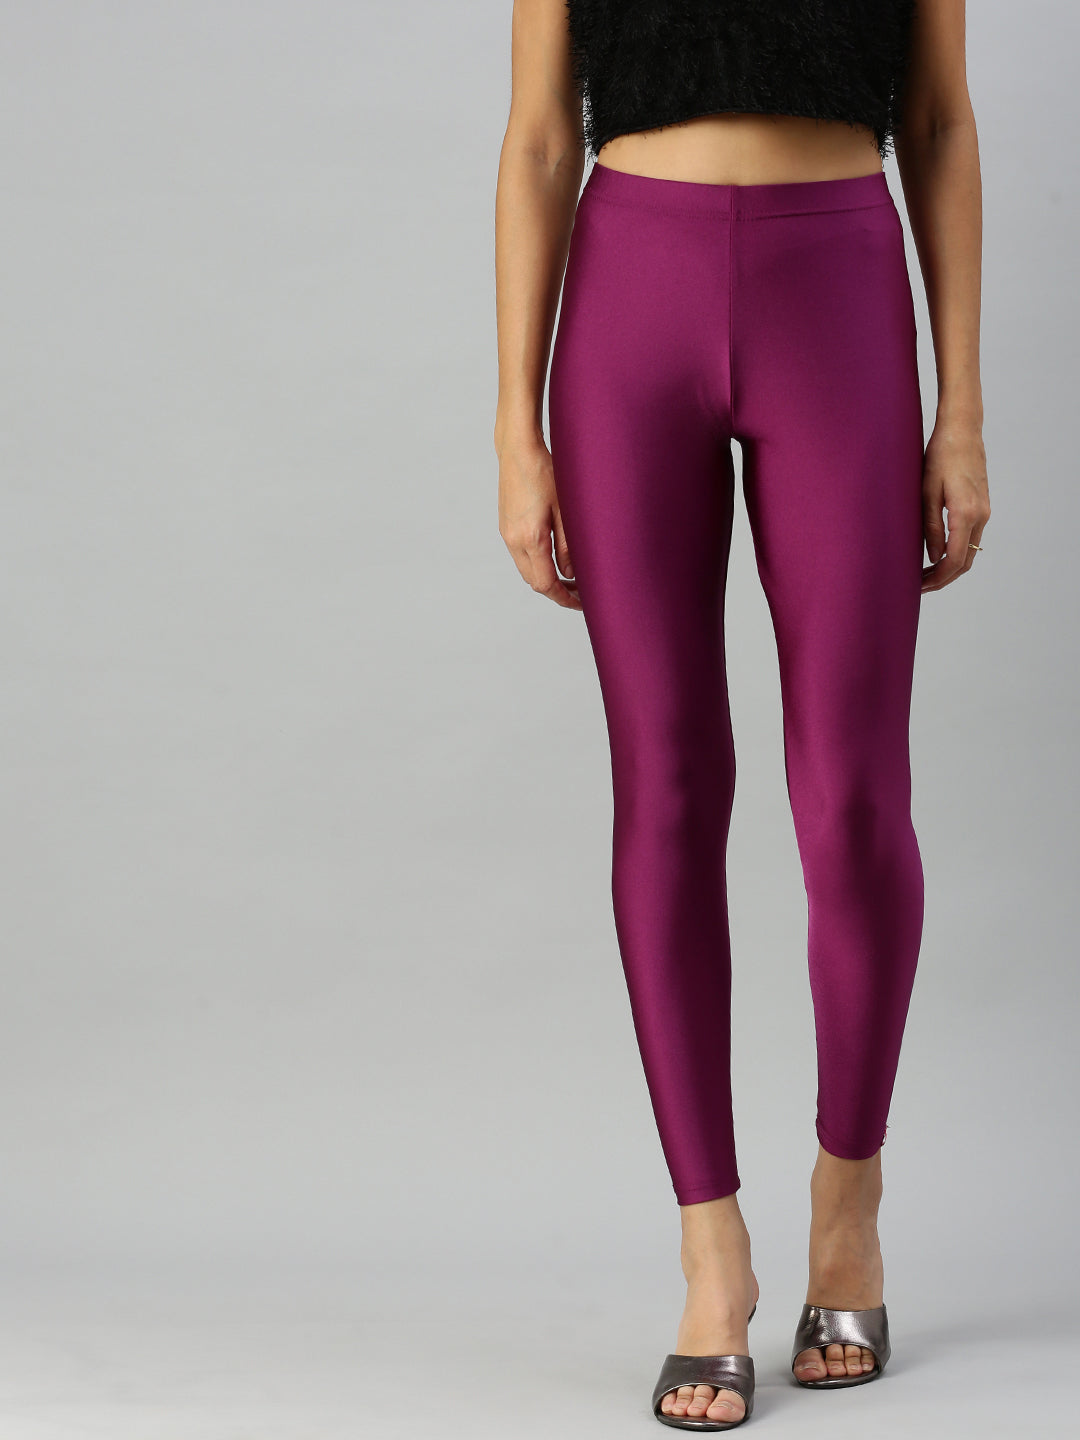 Prisma Shimmer Leggings in Plum for a Chic Look